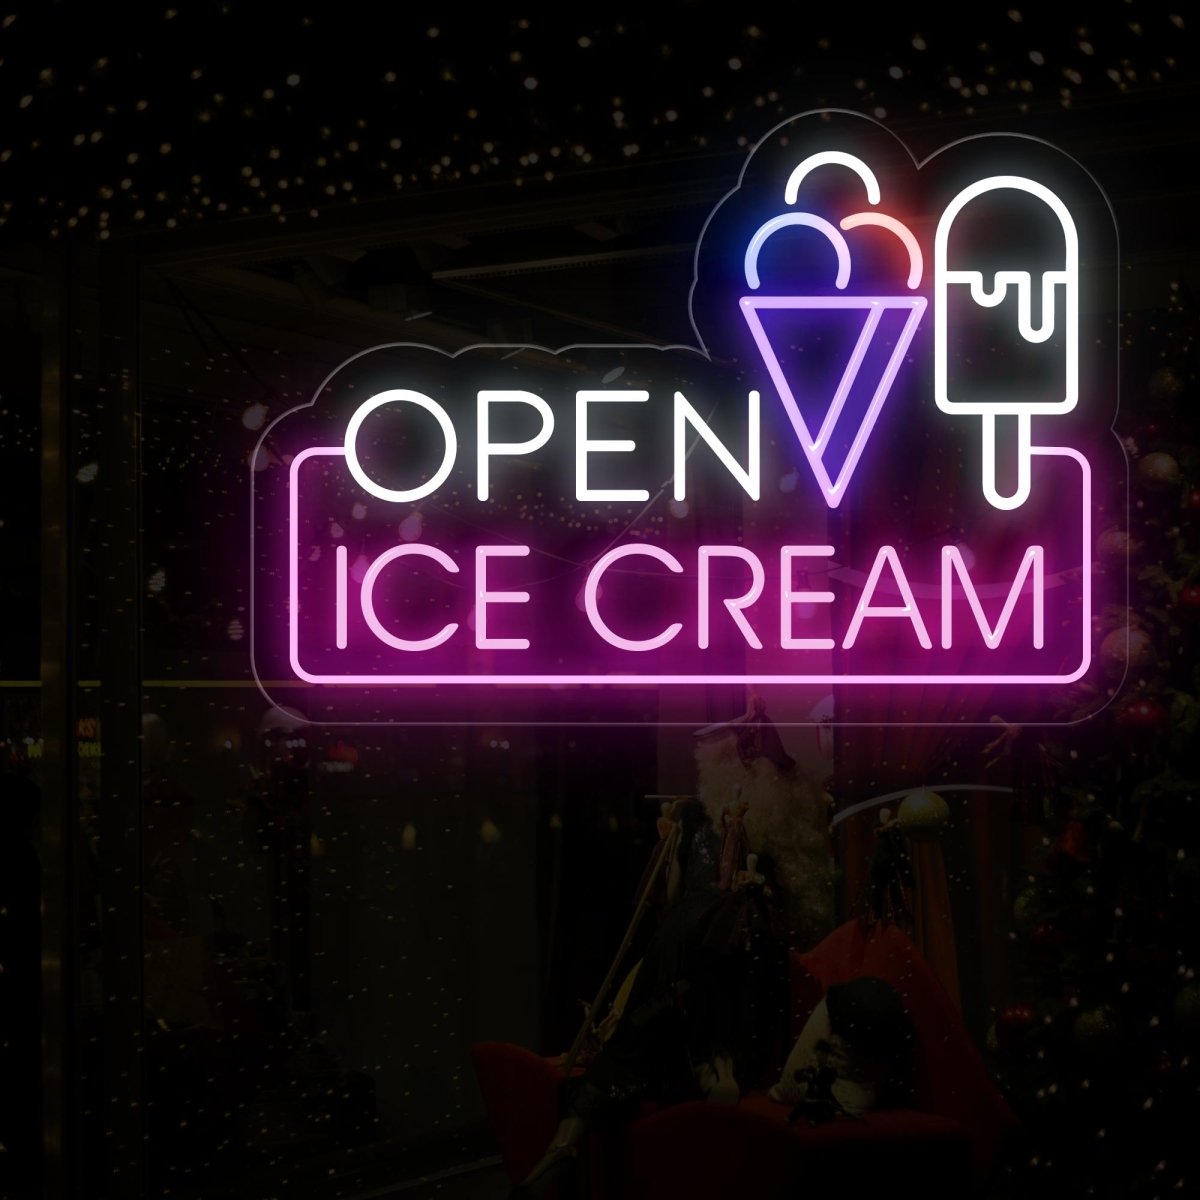 Ice Cream Open Neon Sign: Tempting Displays for Your Ice Cream Shop! - NEONXPERT